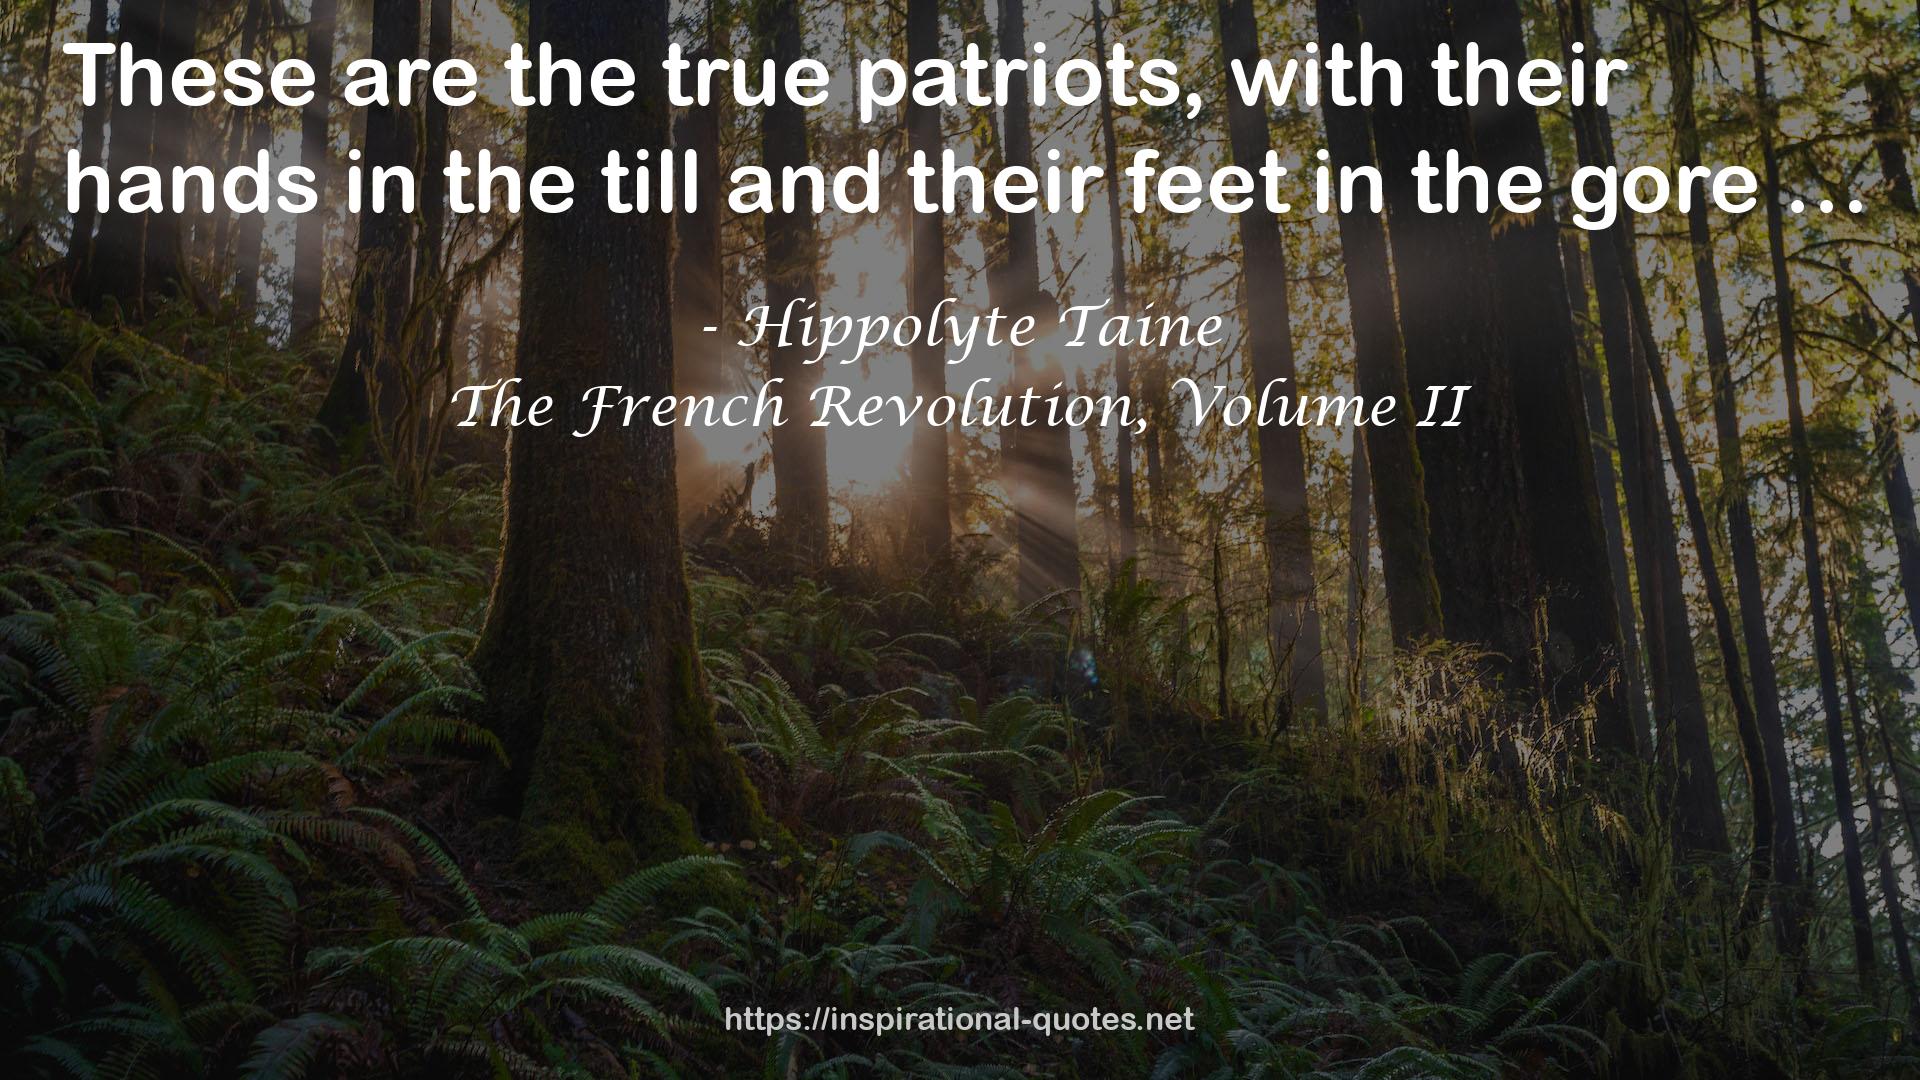 The French Revolution, Volume II QUOTES